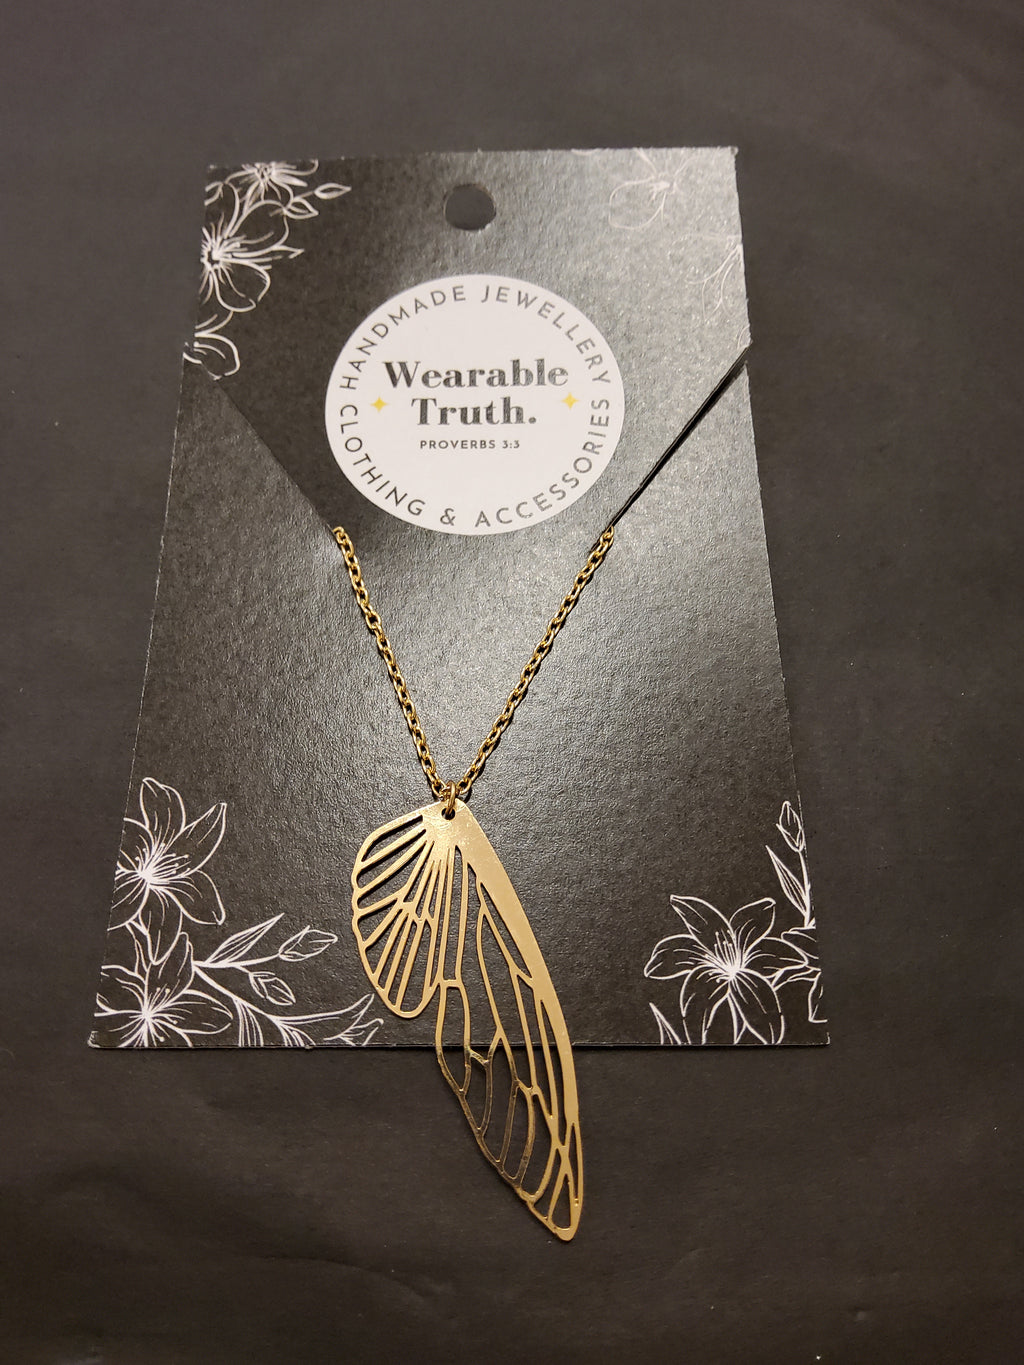 Wearable Truth butterfly wing necklace